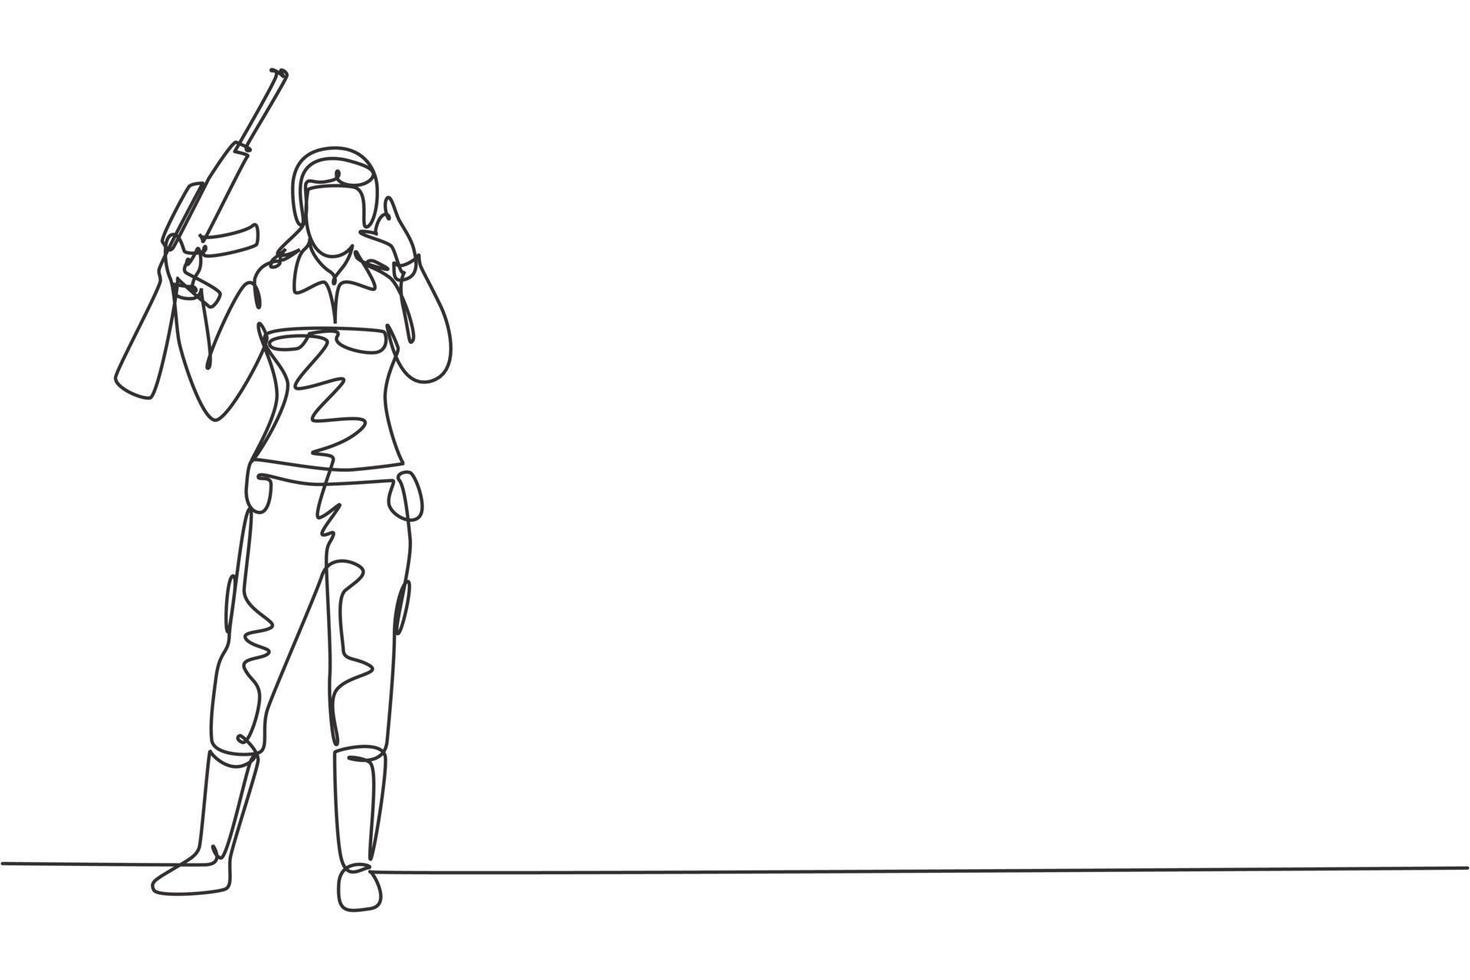 Continuous one line drawing female Soldier stands with weapon, uniform, and call me gesture serving the country with strength of military forces. Single line draw design vector graphic illustration